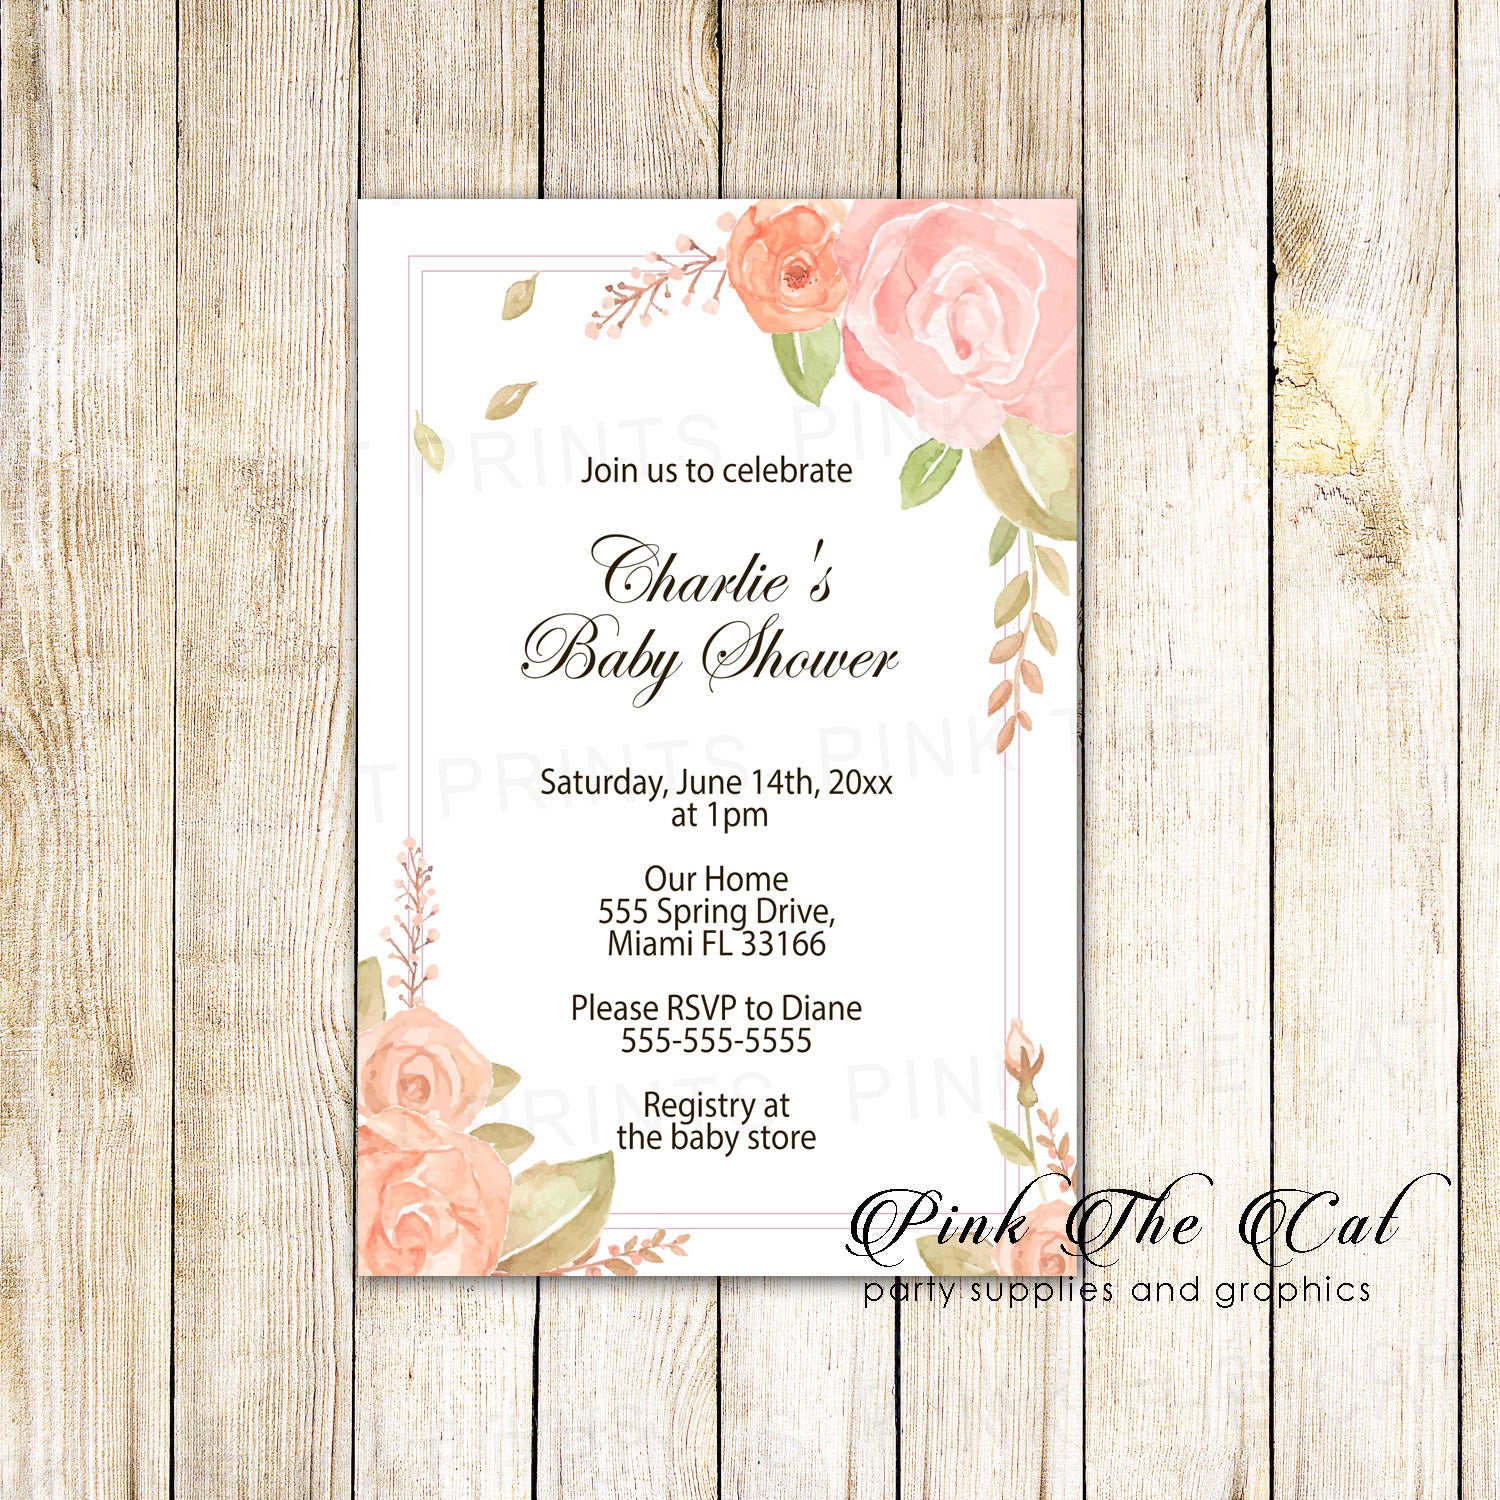 Blush pink floral invitations baby shower personalized printable